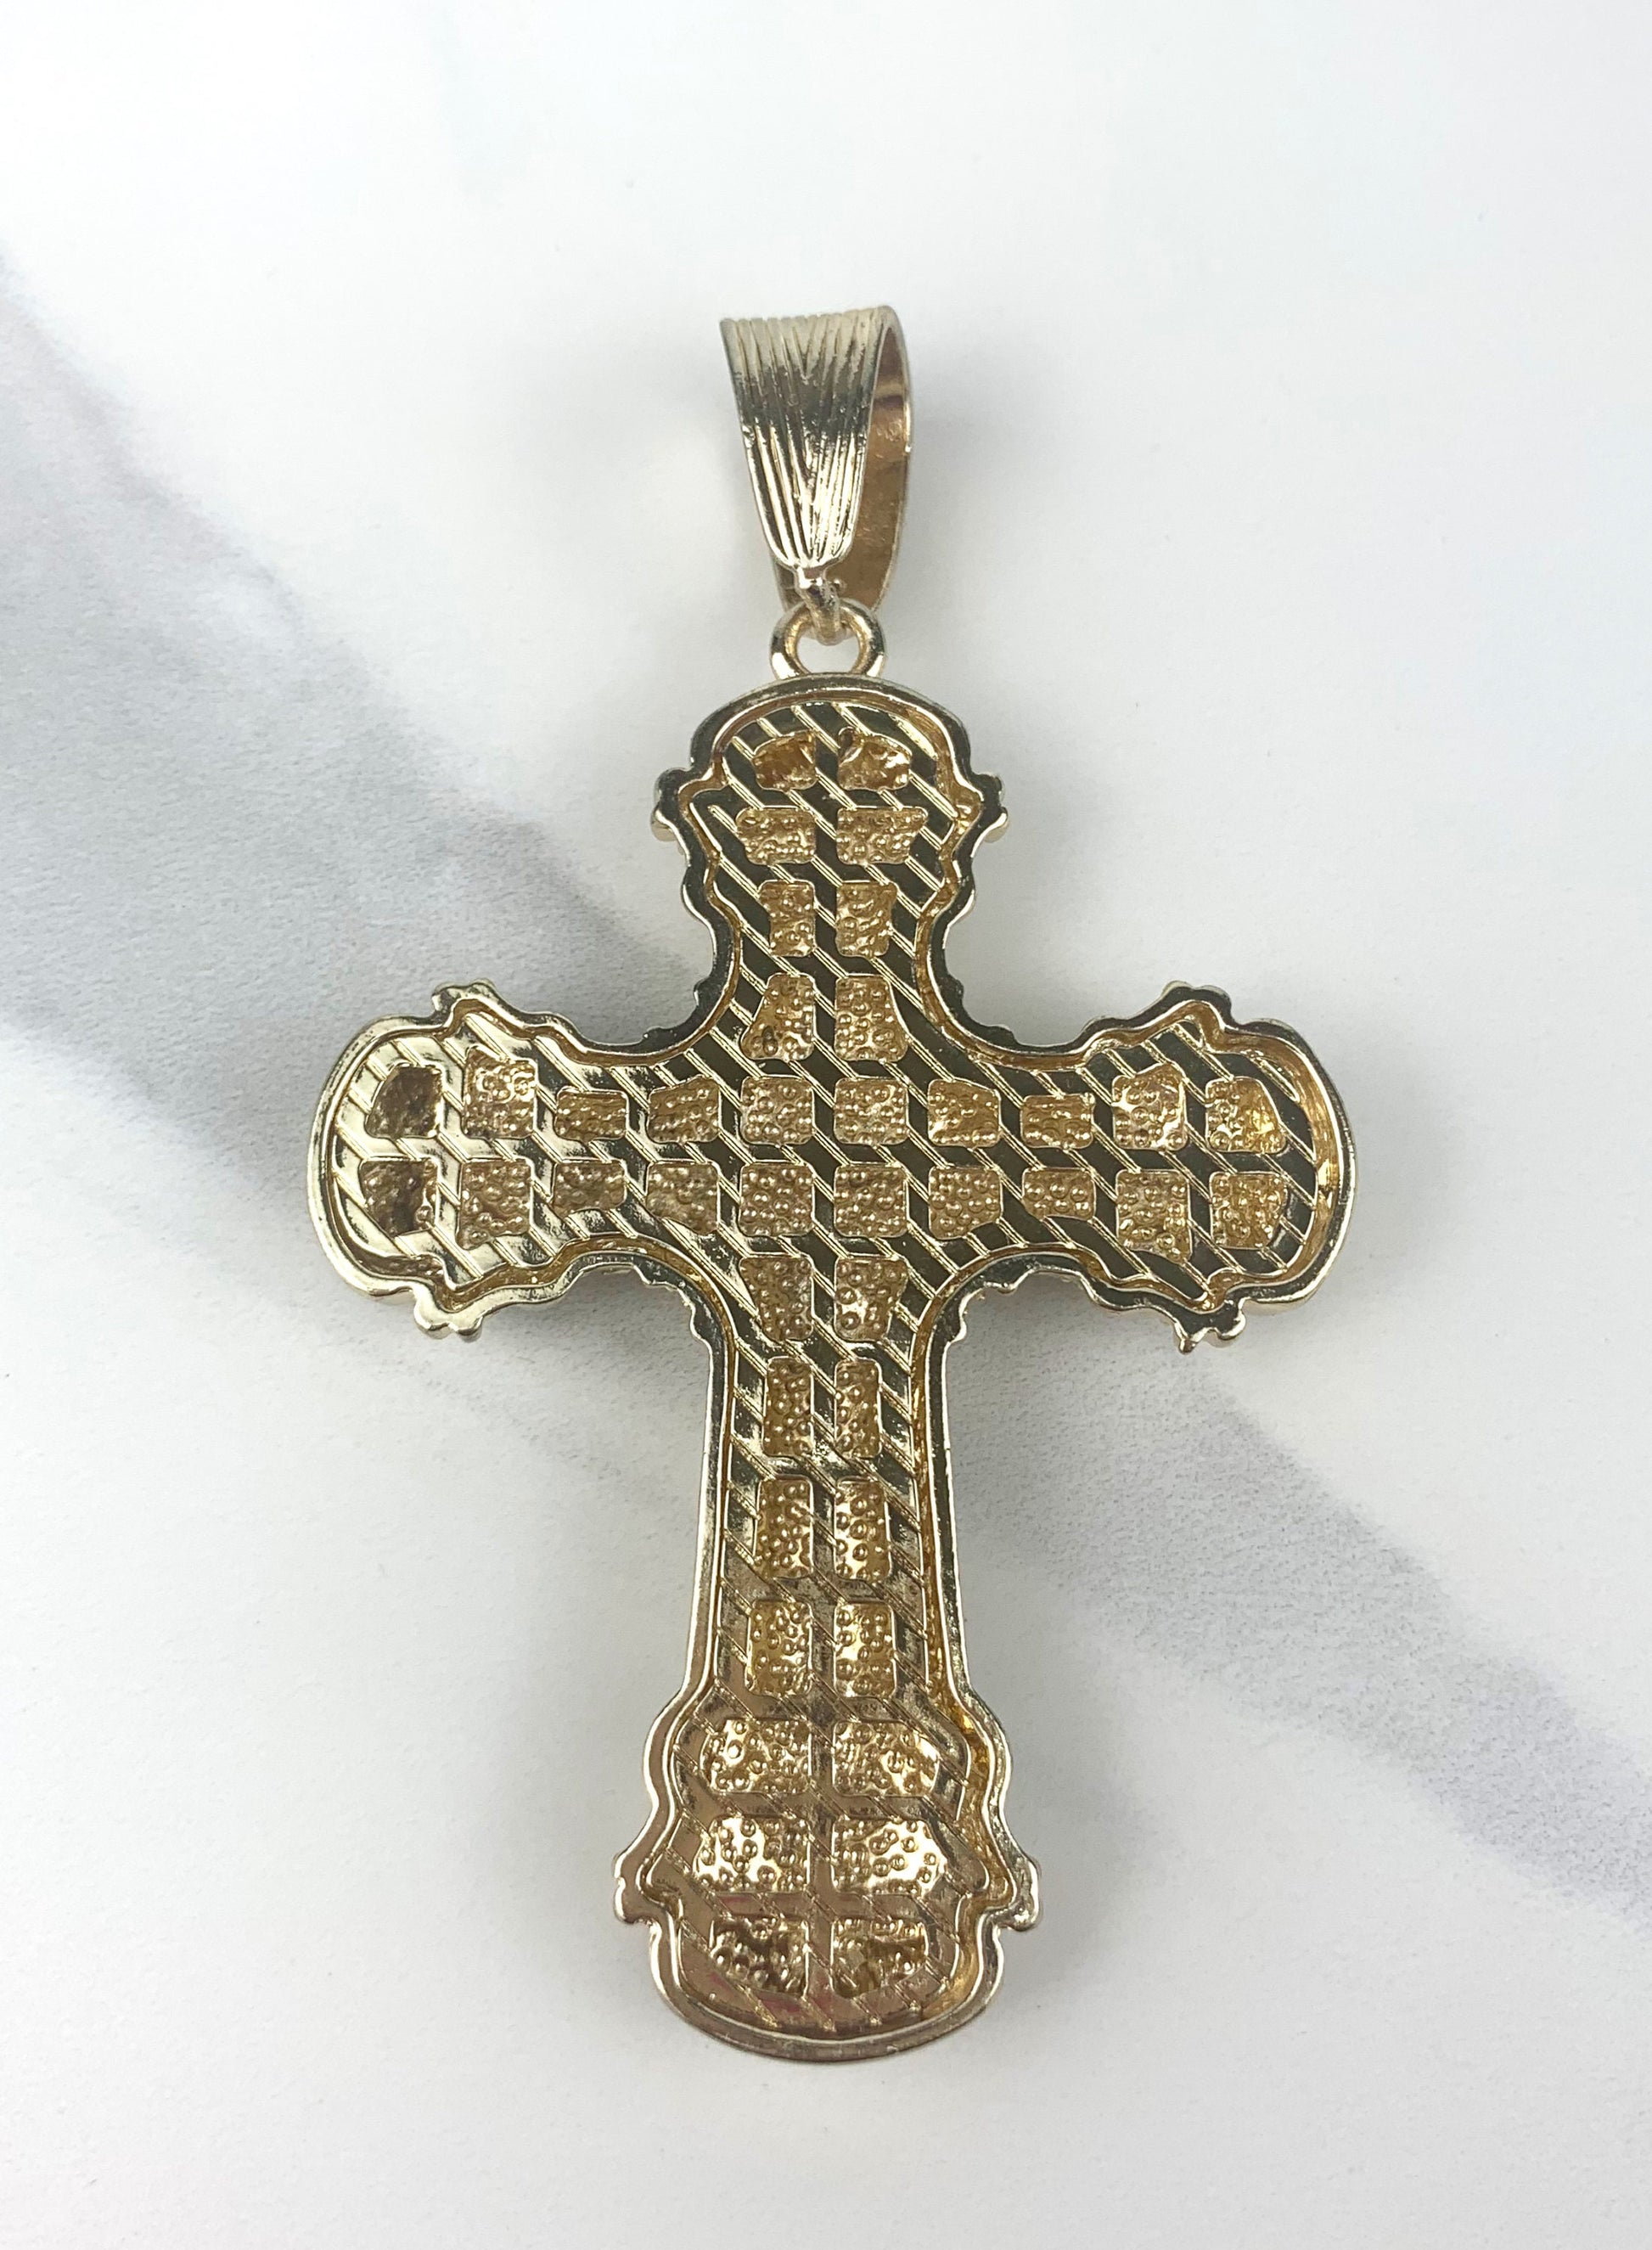 18k Gold Filled with Zirconia Fancy Cross Charms Wholesale Jewelry Supplies